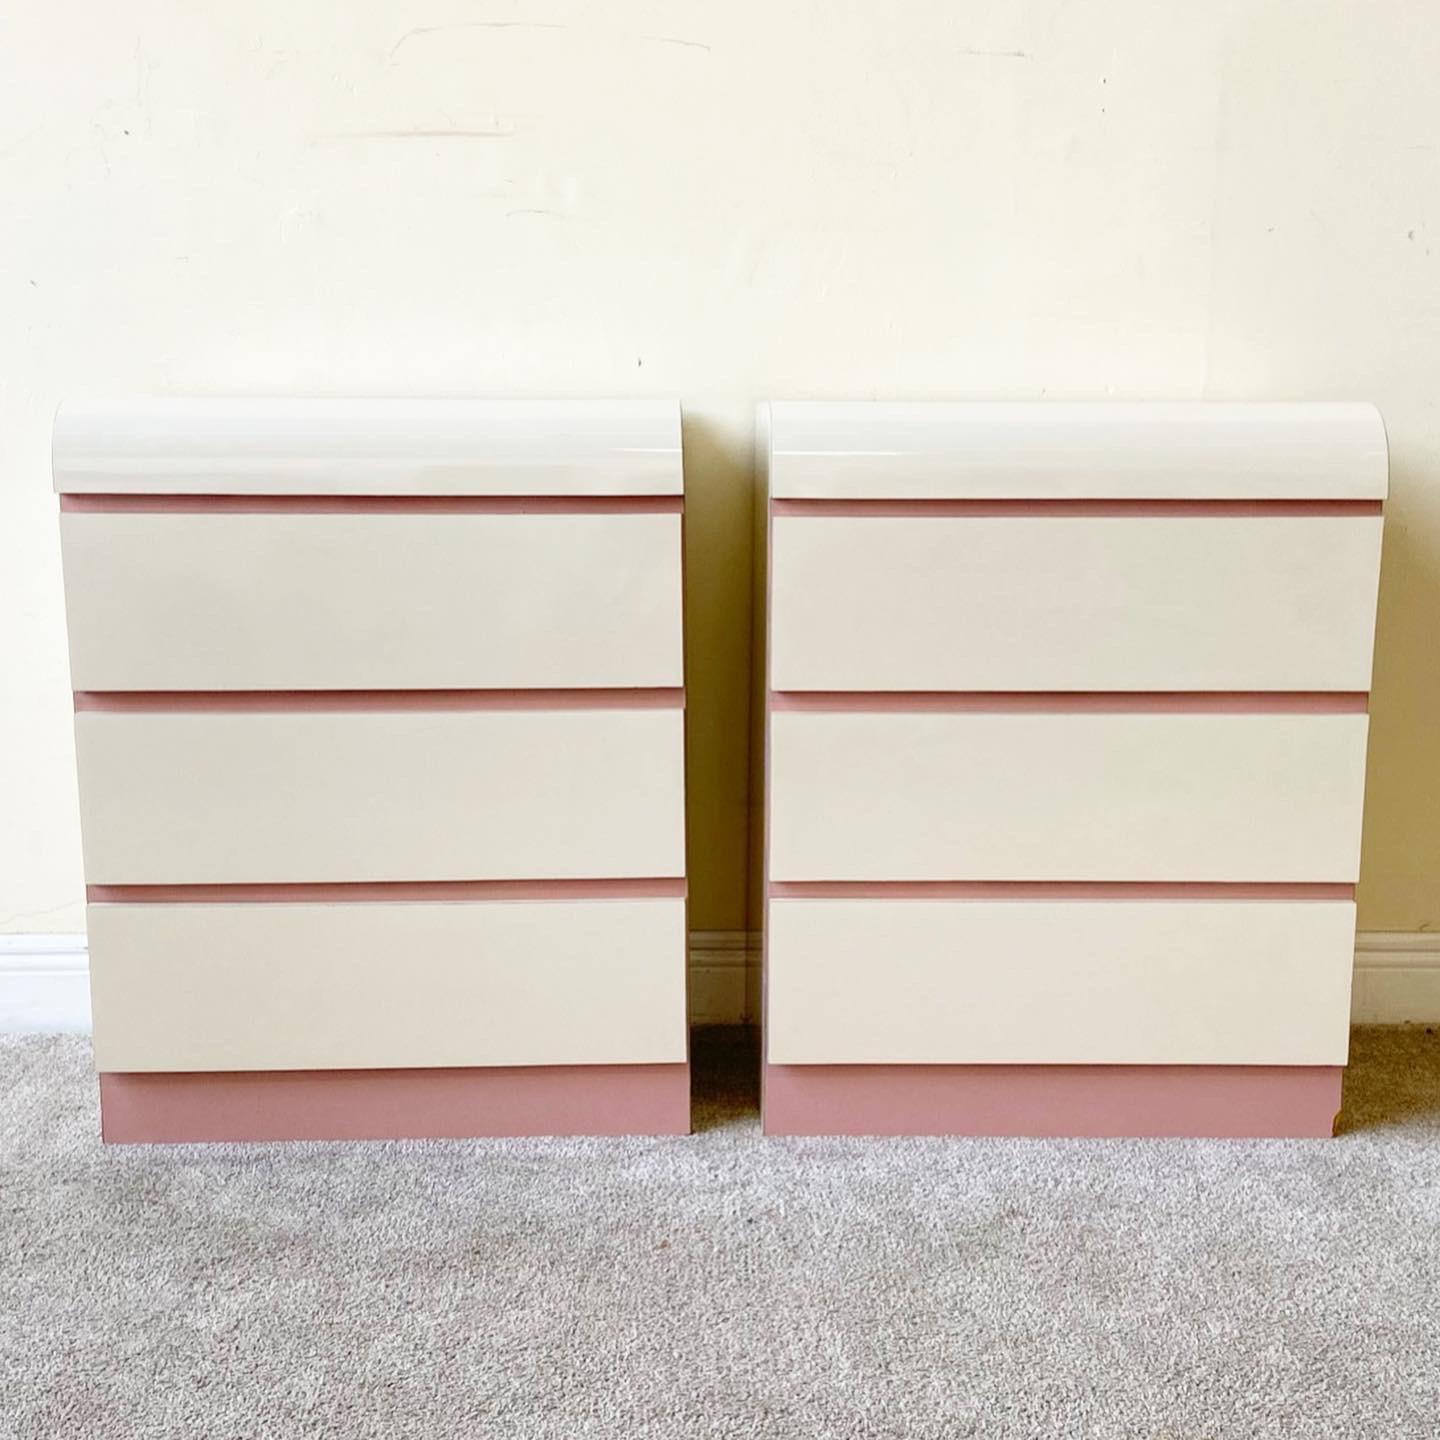 Late 20th Century Postmodern Pink & Cream Lacquer Laminate Waterfall Nightstands – a Pair